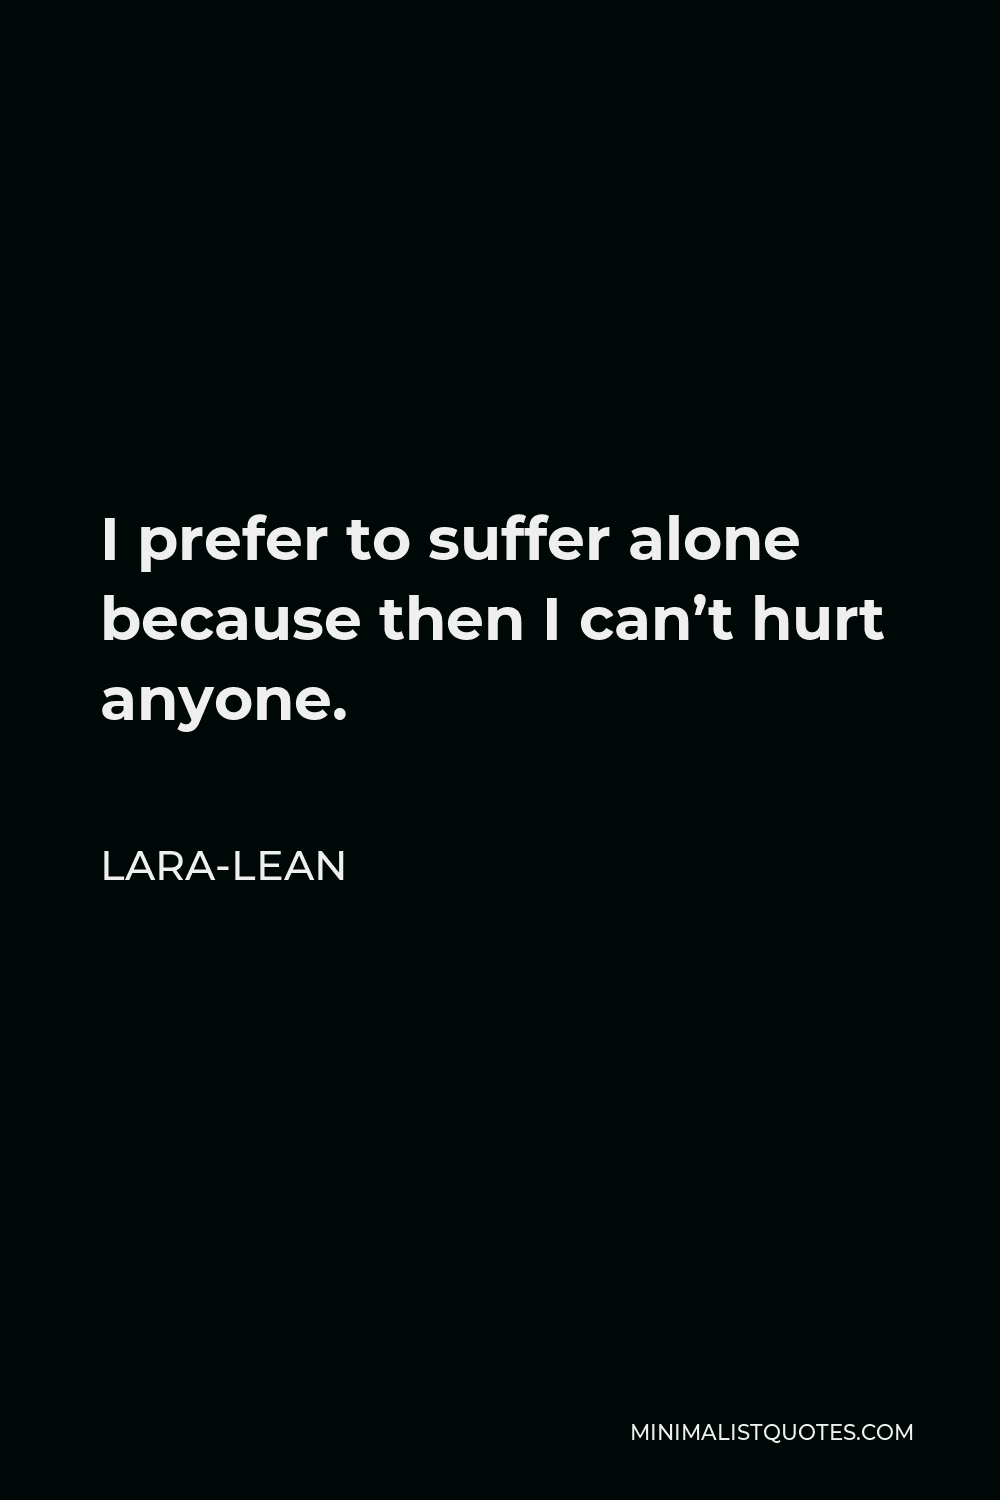 Lara-Lean Quote - I prefer to suffer alone because then I can’t hurt anyone.